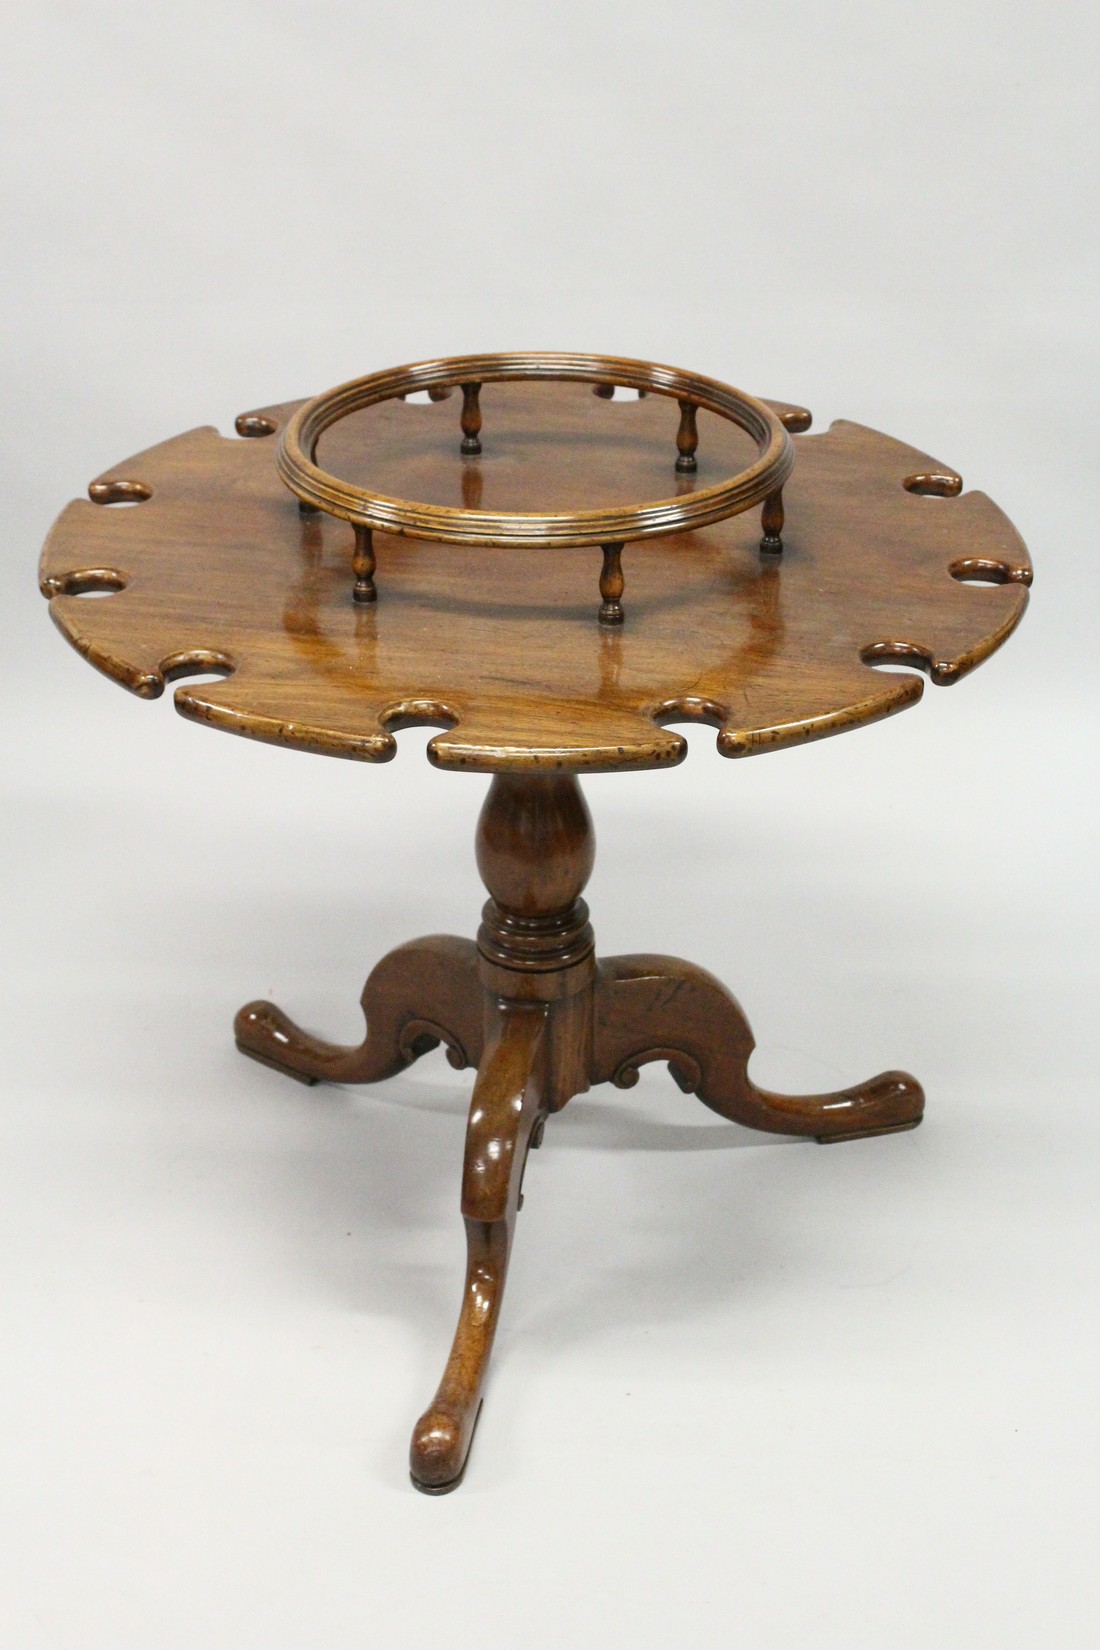 A GEORGE III STYLE MAHOGANY SHIP'S TRIPOD TABLE with centre section for bottles. The sides with - Image 3 of 6